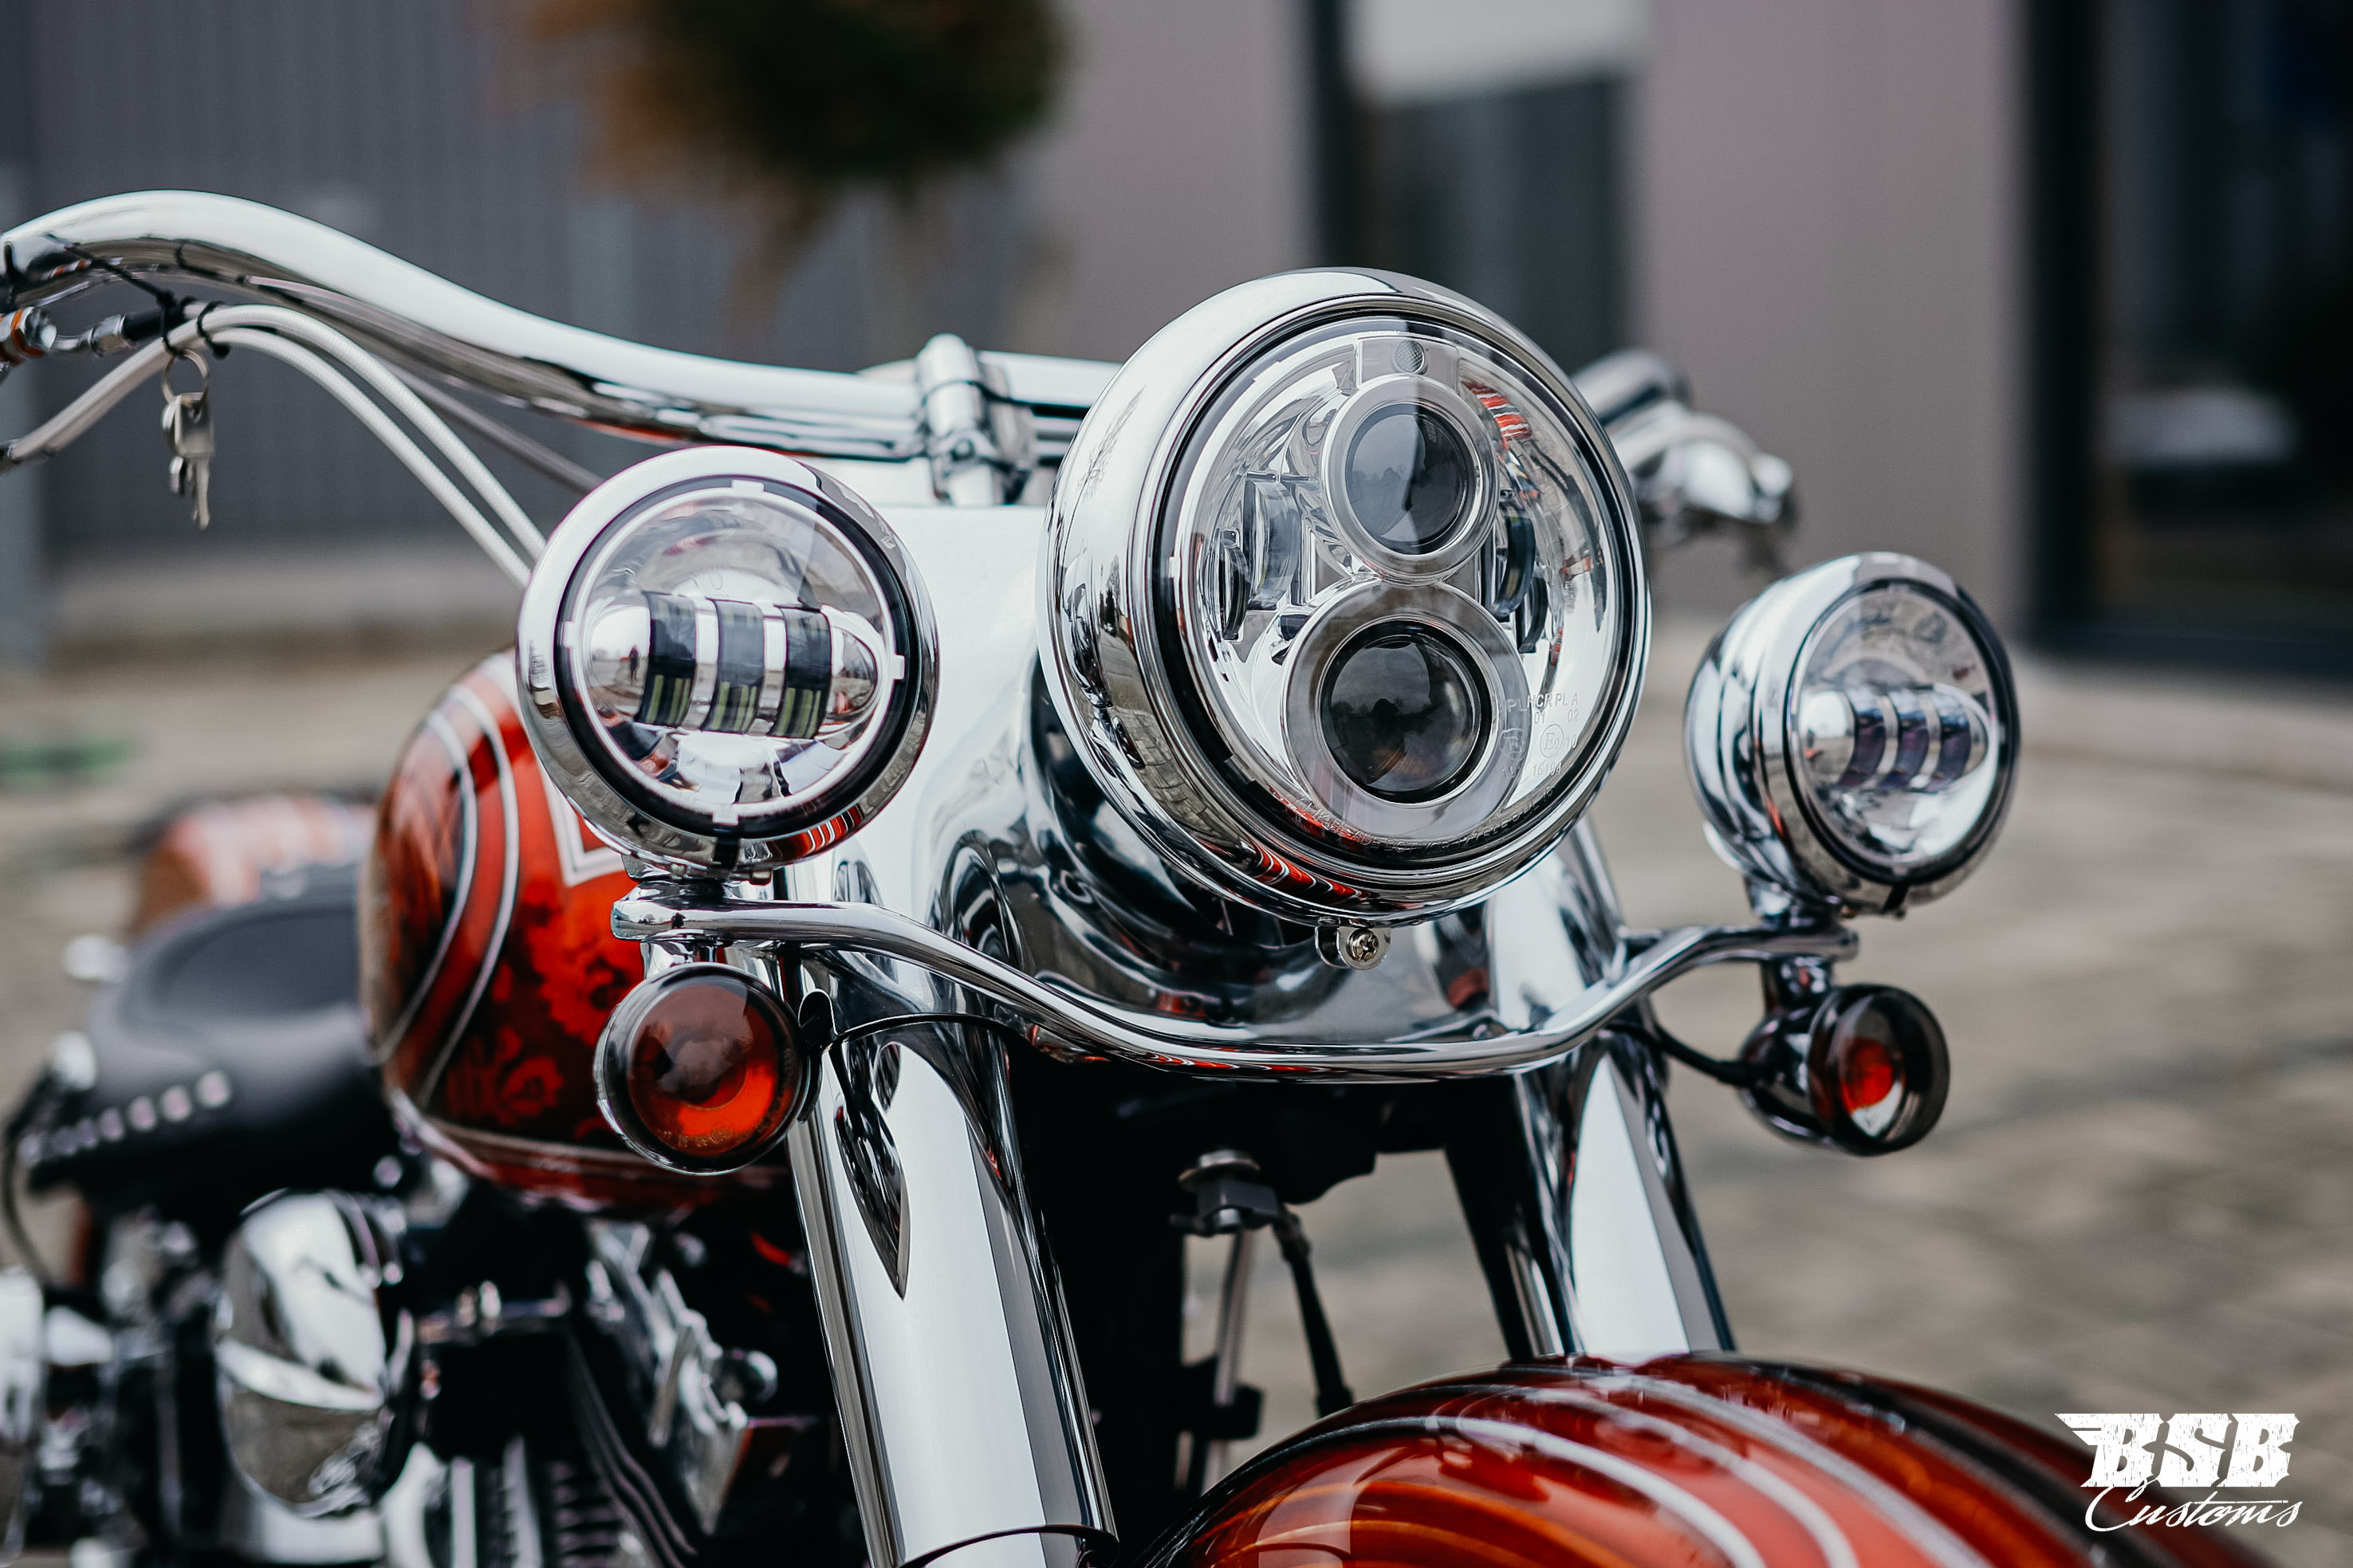 BSB Customs LED Scheinwerfer  Parts for Harley-Davidson® Motorcycles